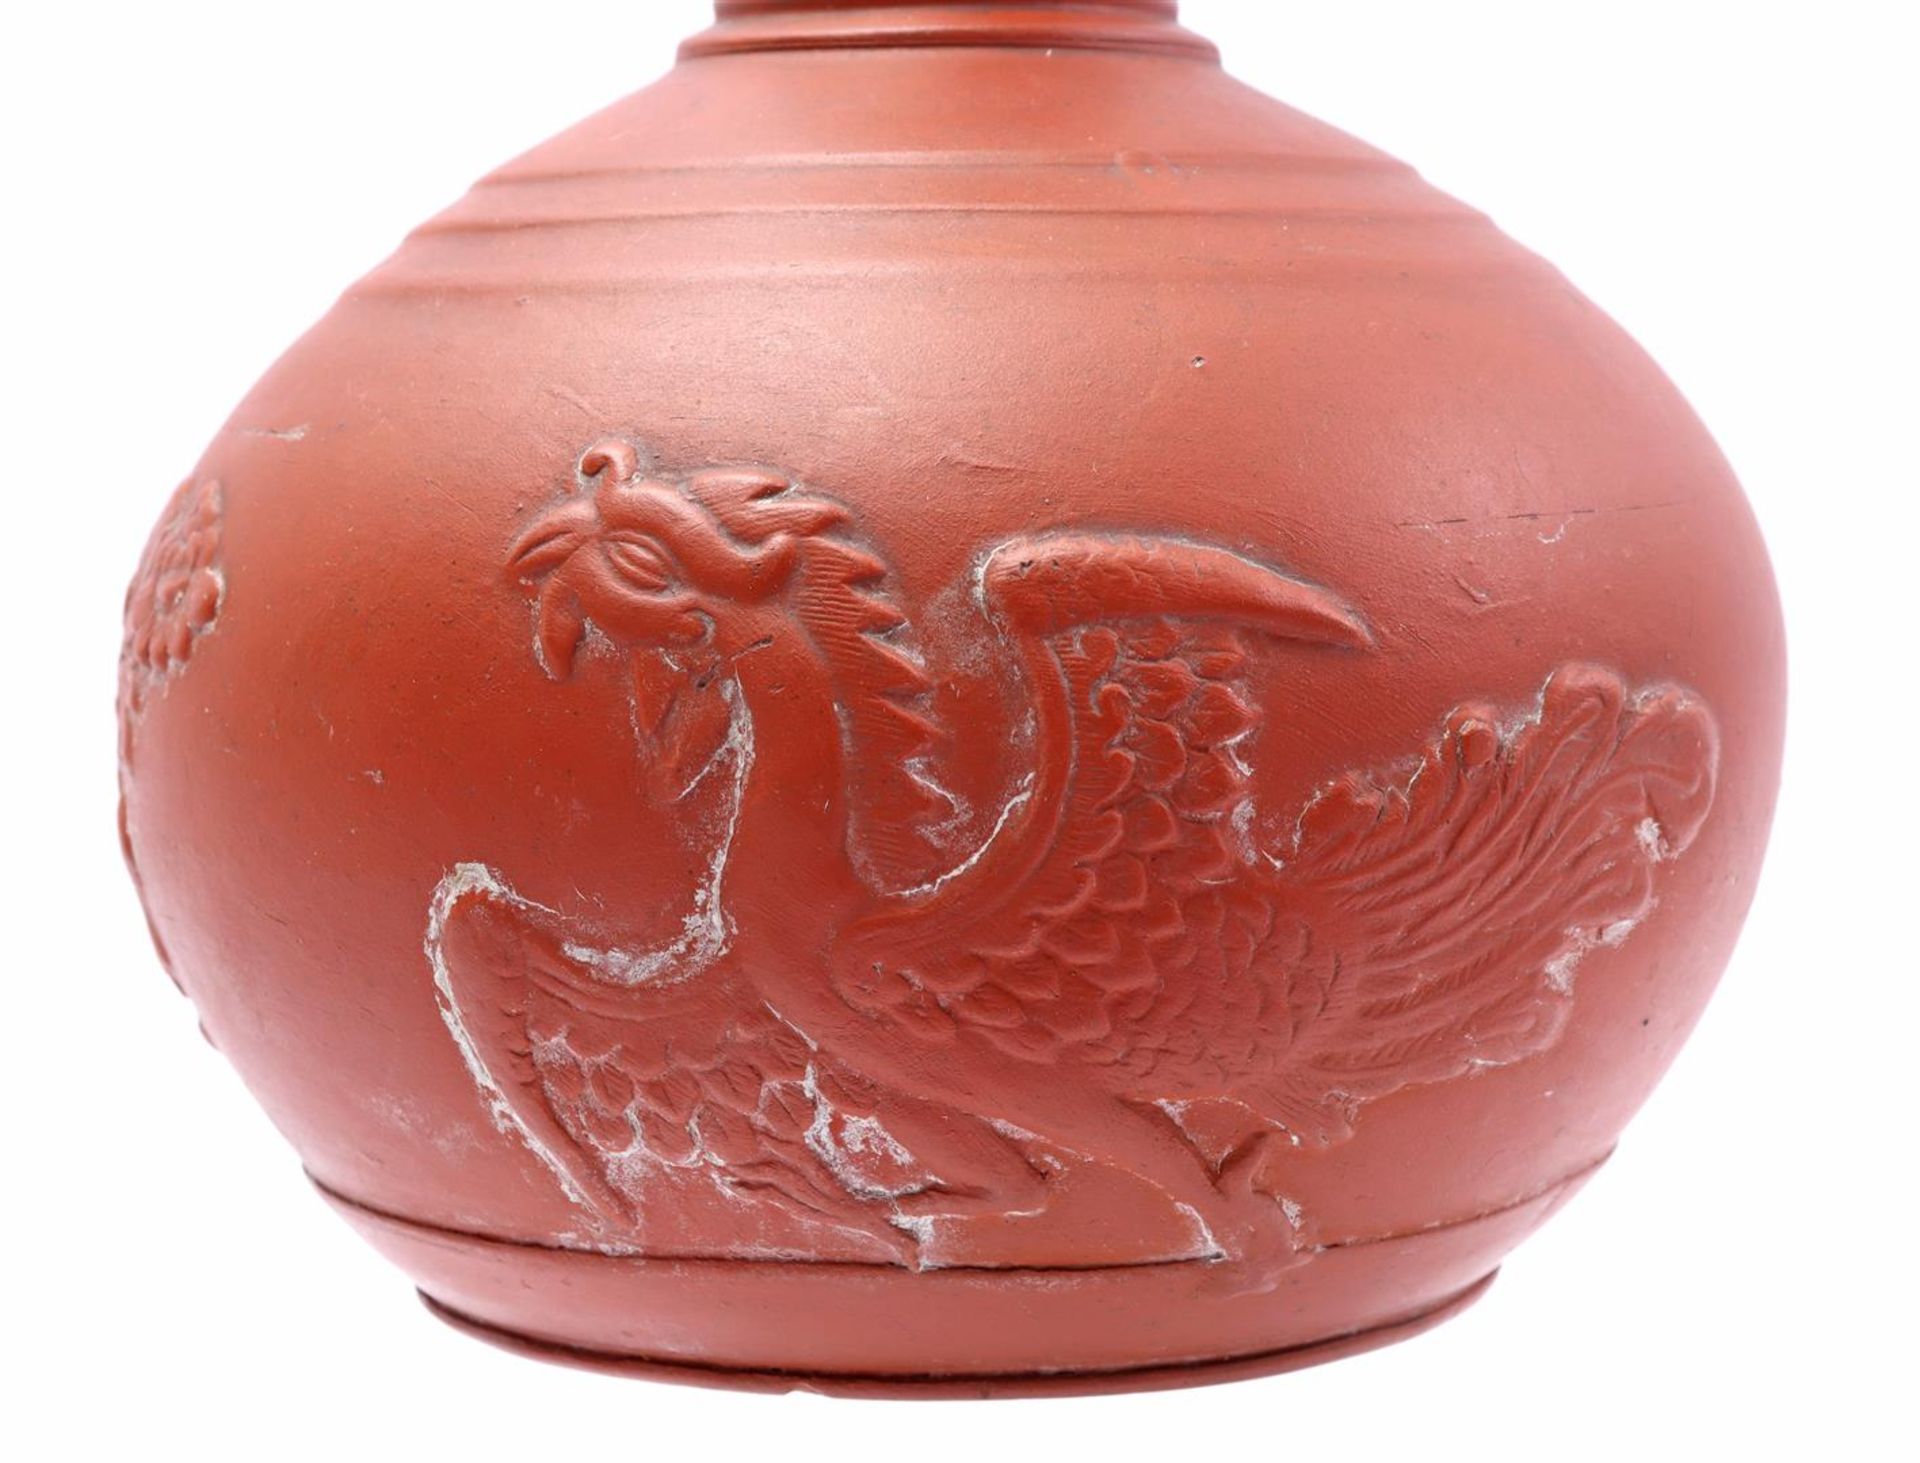 Earthenware Yixing vase with decor of 2 phoenixes and a flower vase - Image 2 of 2